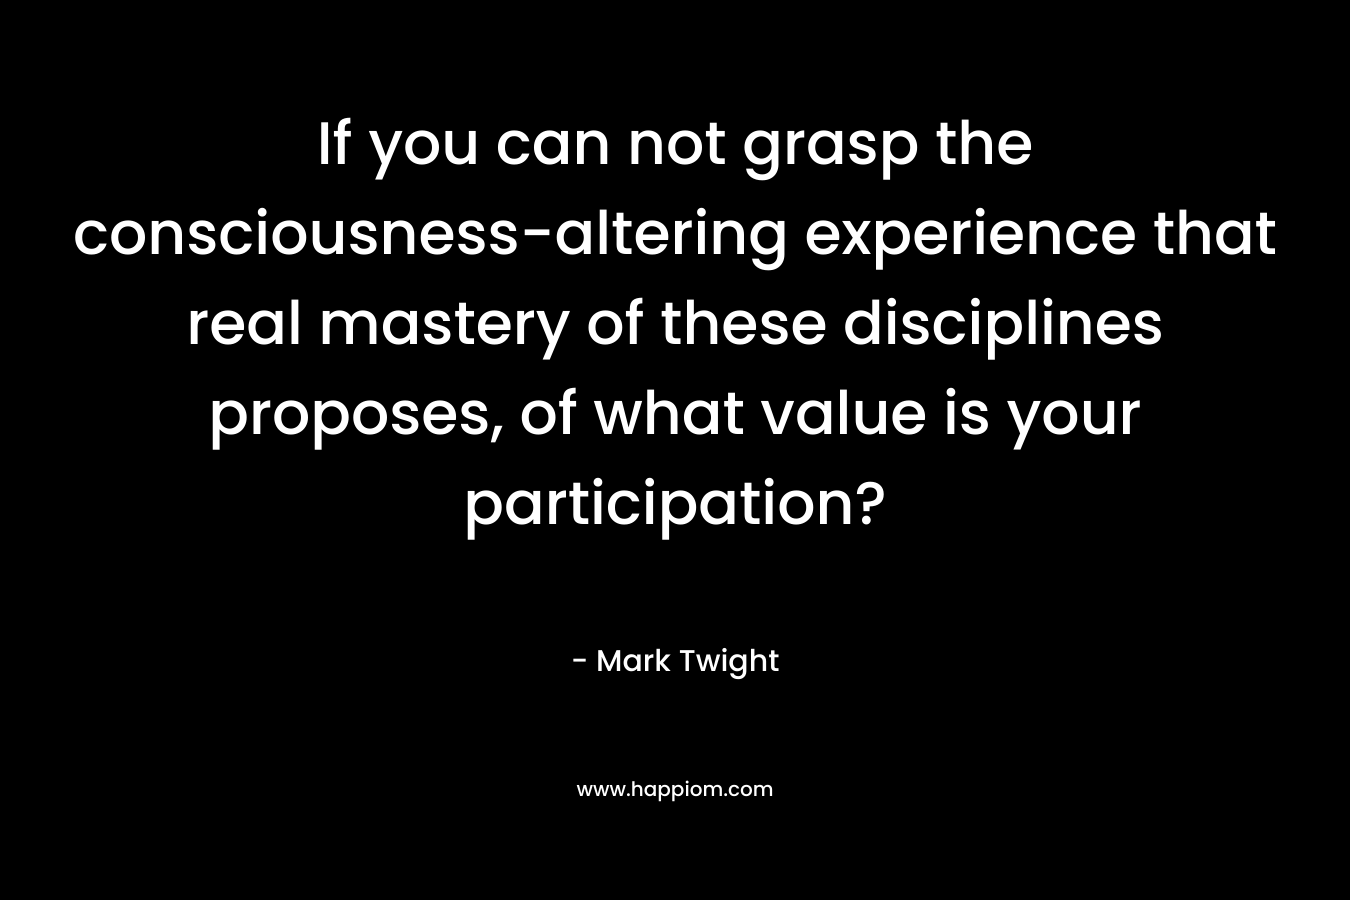 If you can not grasp the consciousness-altering experience that real mastery of these disciplines proposes, of what value is your participation?